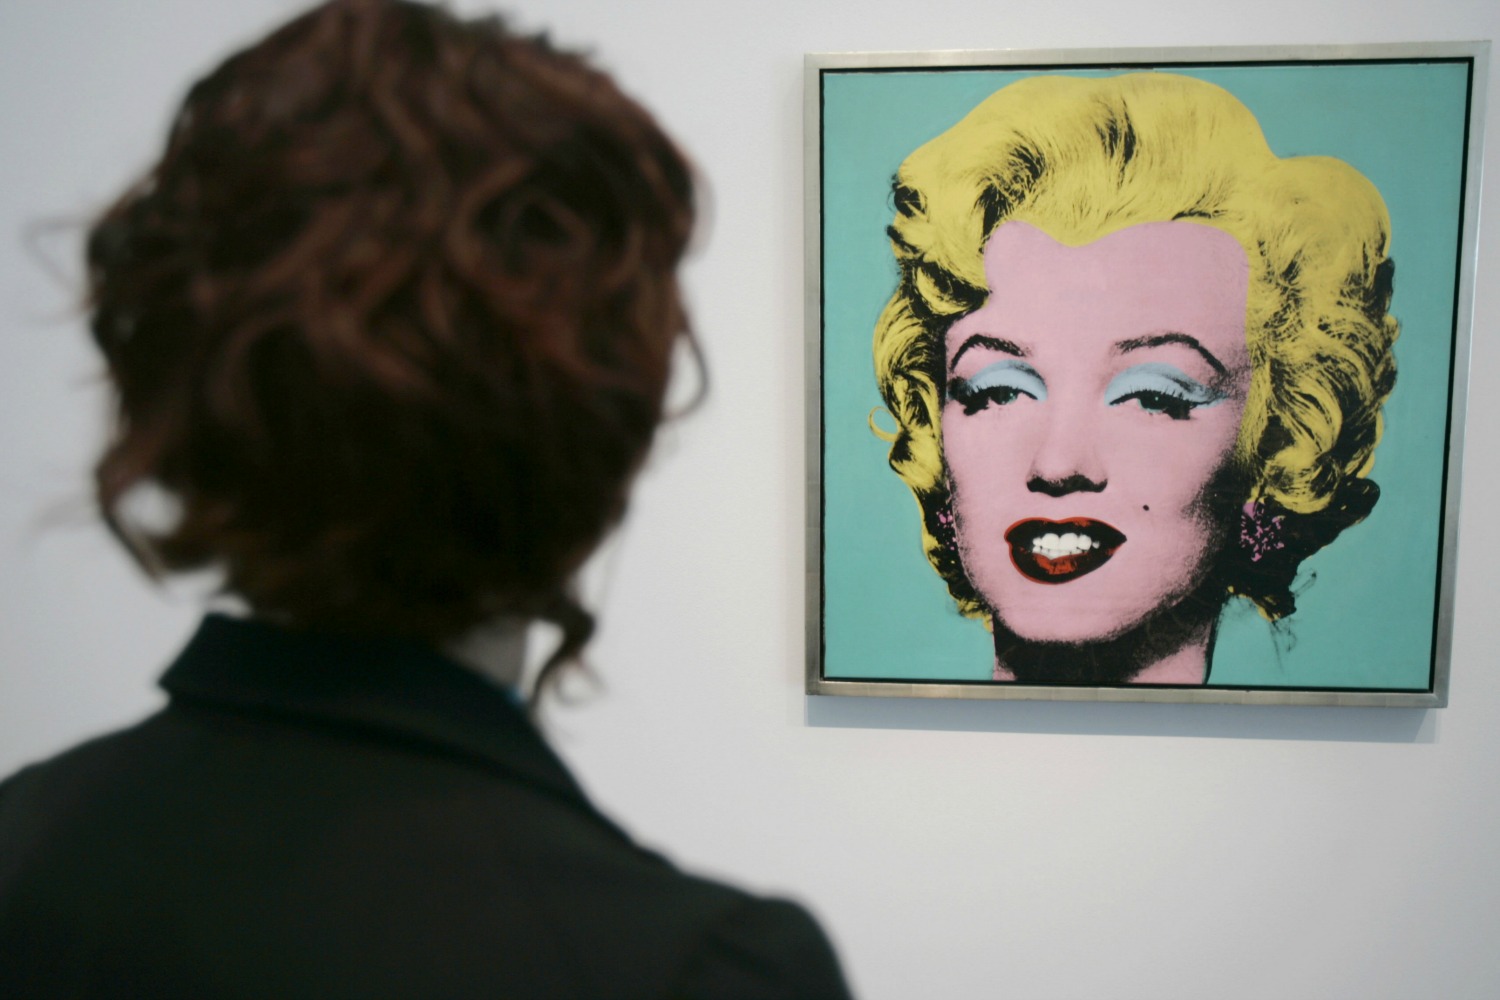 Warhol’s Four Marilyns auctioned for $36 million